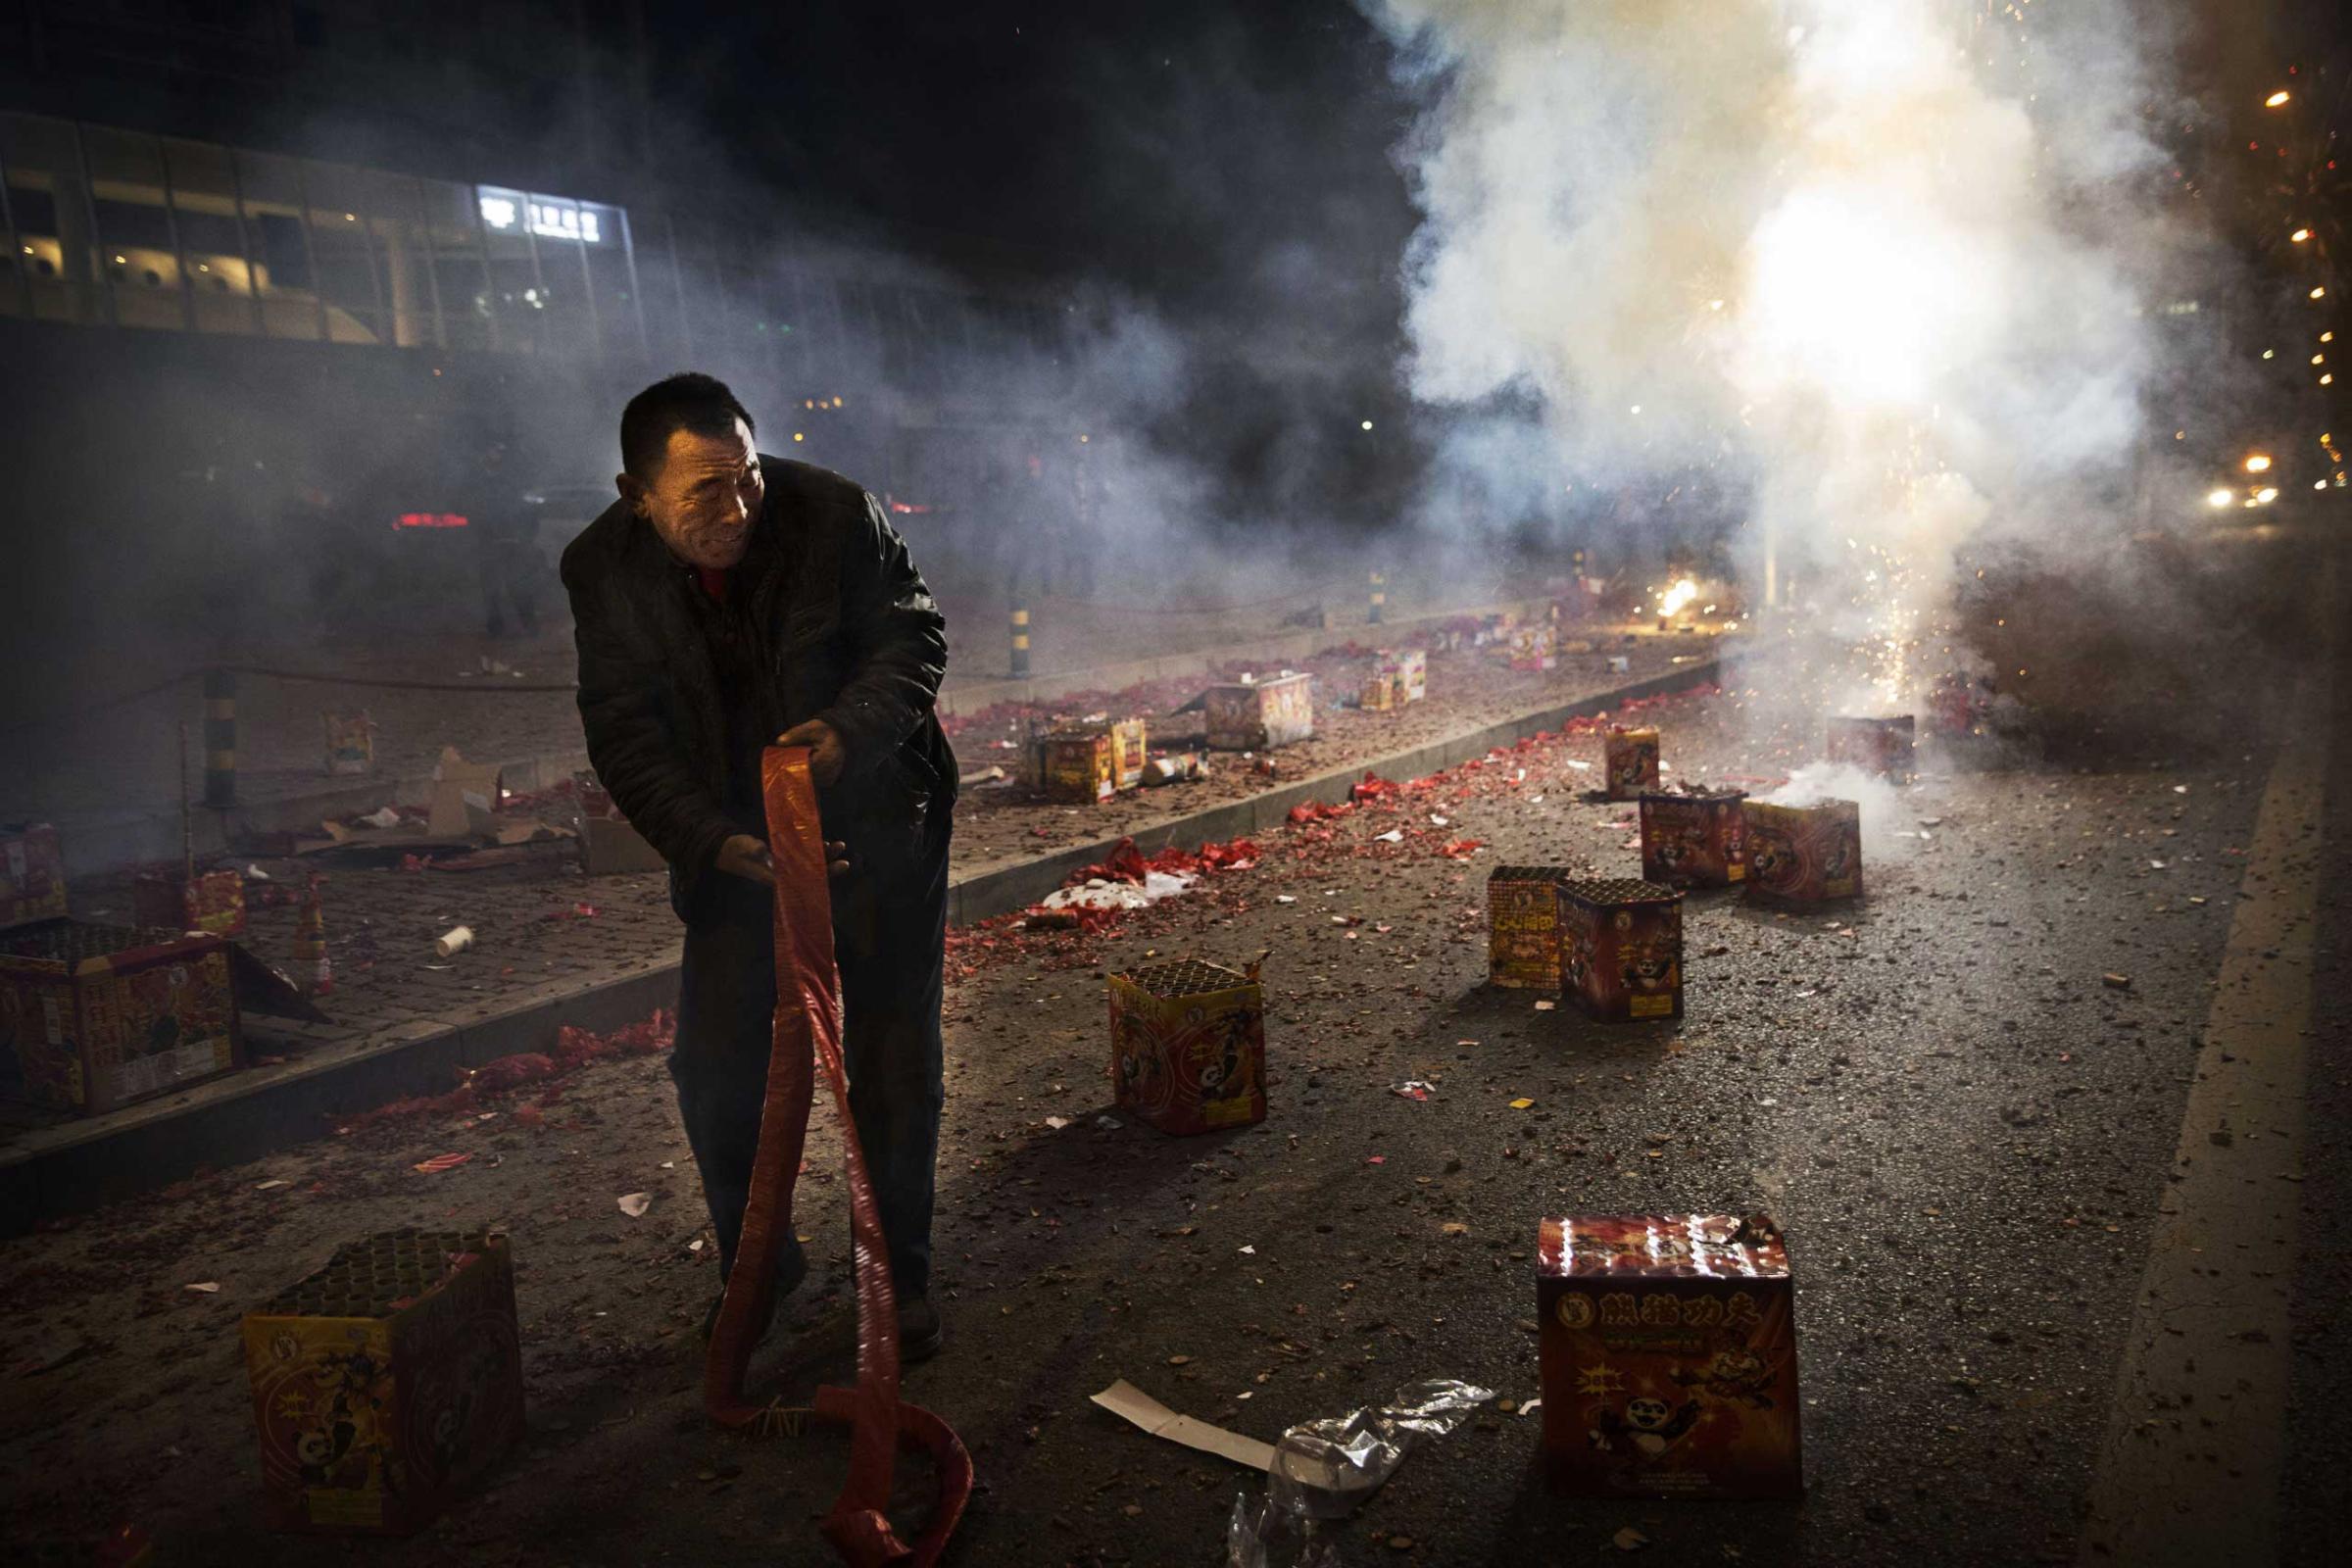 A Chinese man reacts as firecrackers he lit explode during celebrations of the Lunar New early on Feb. 19, 2015 in Beijing.